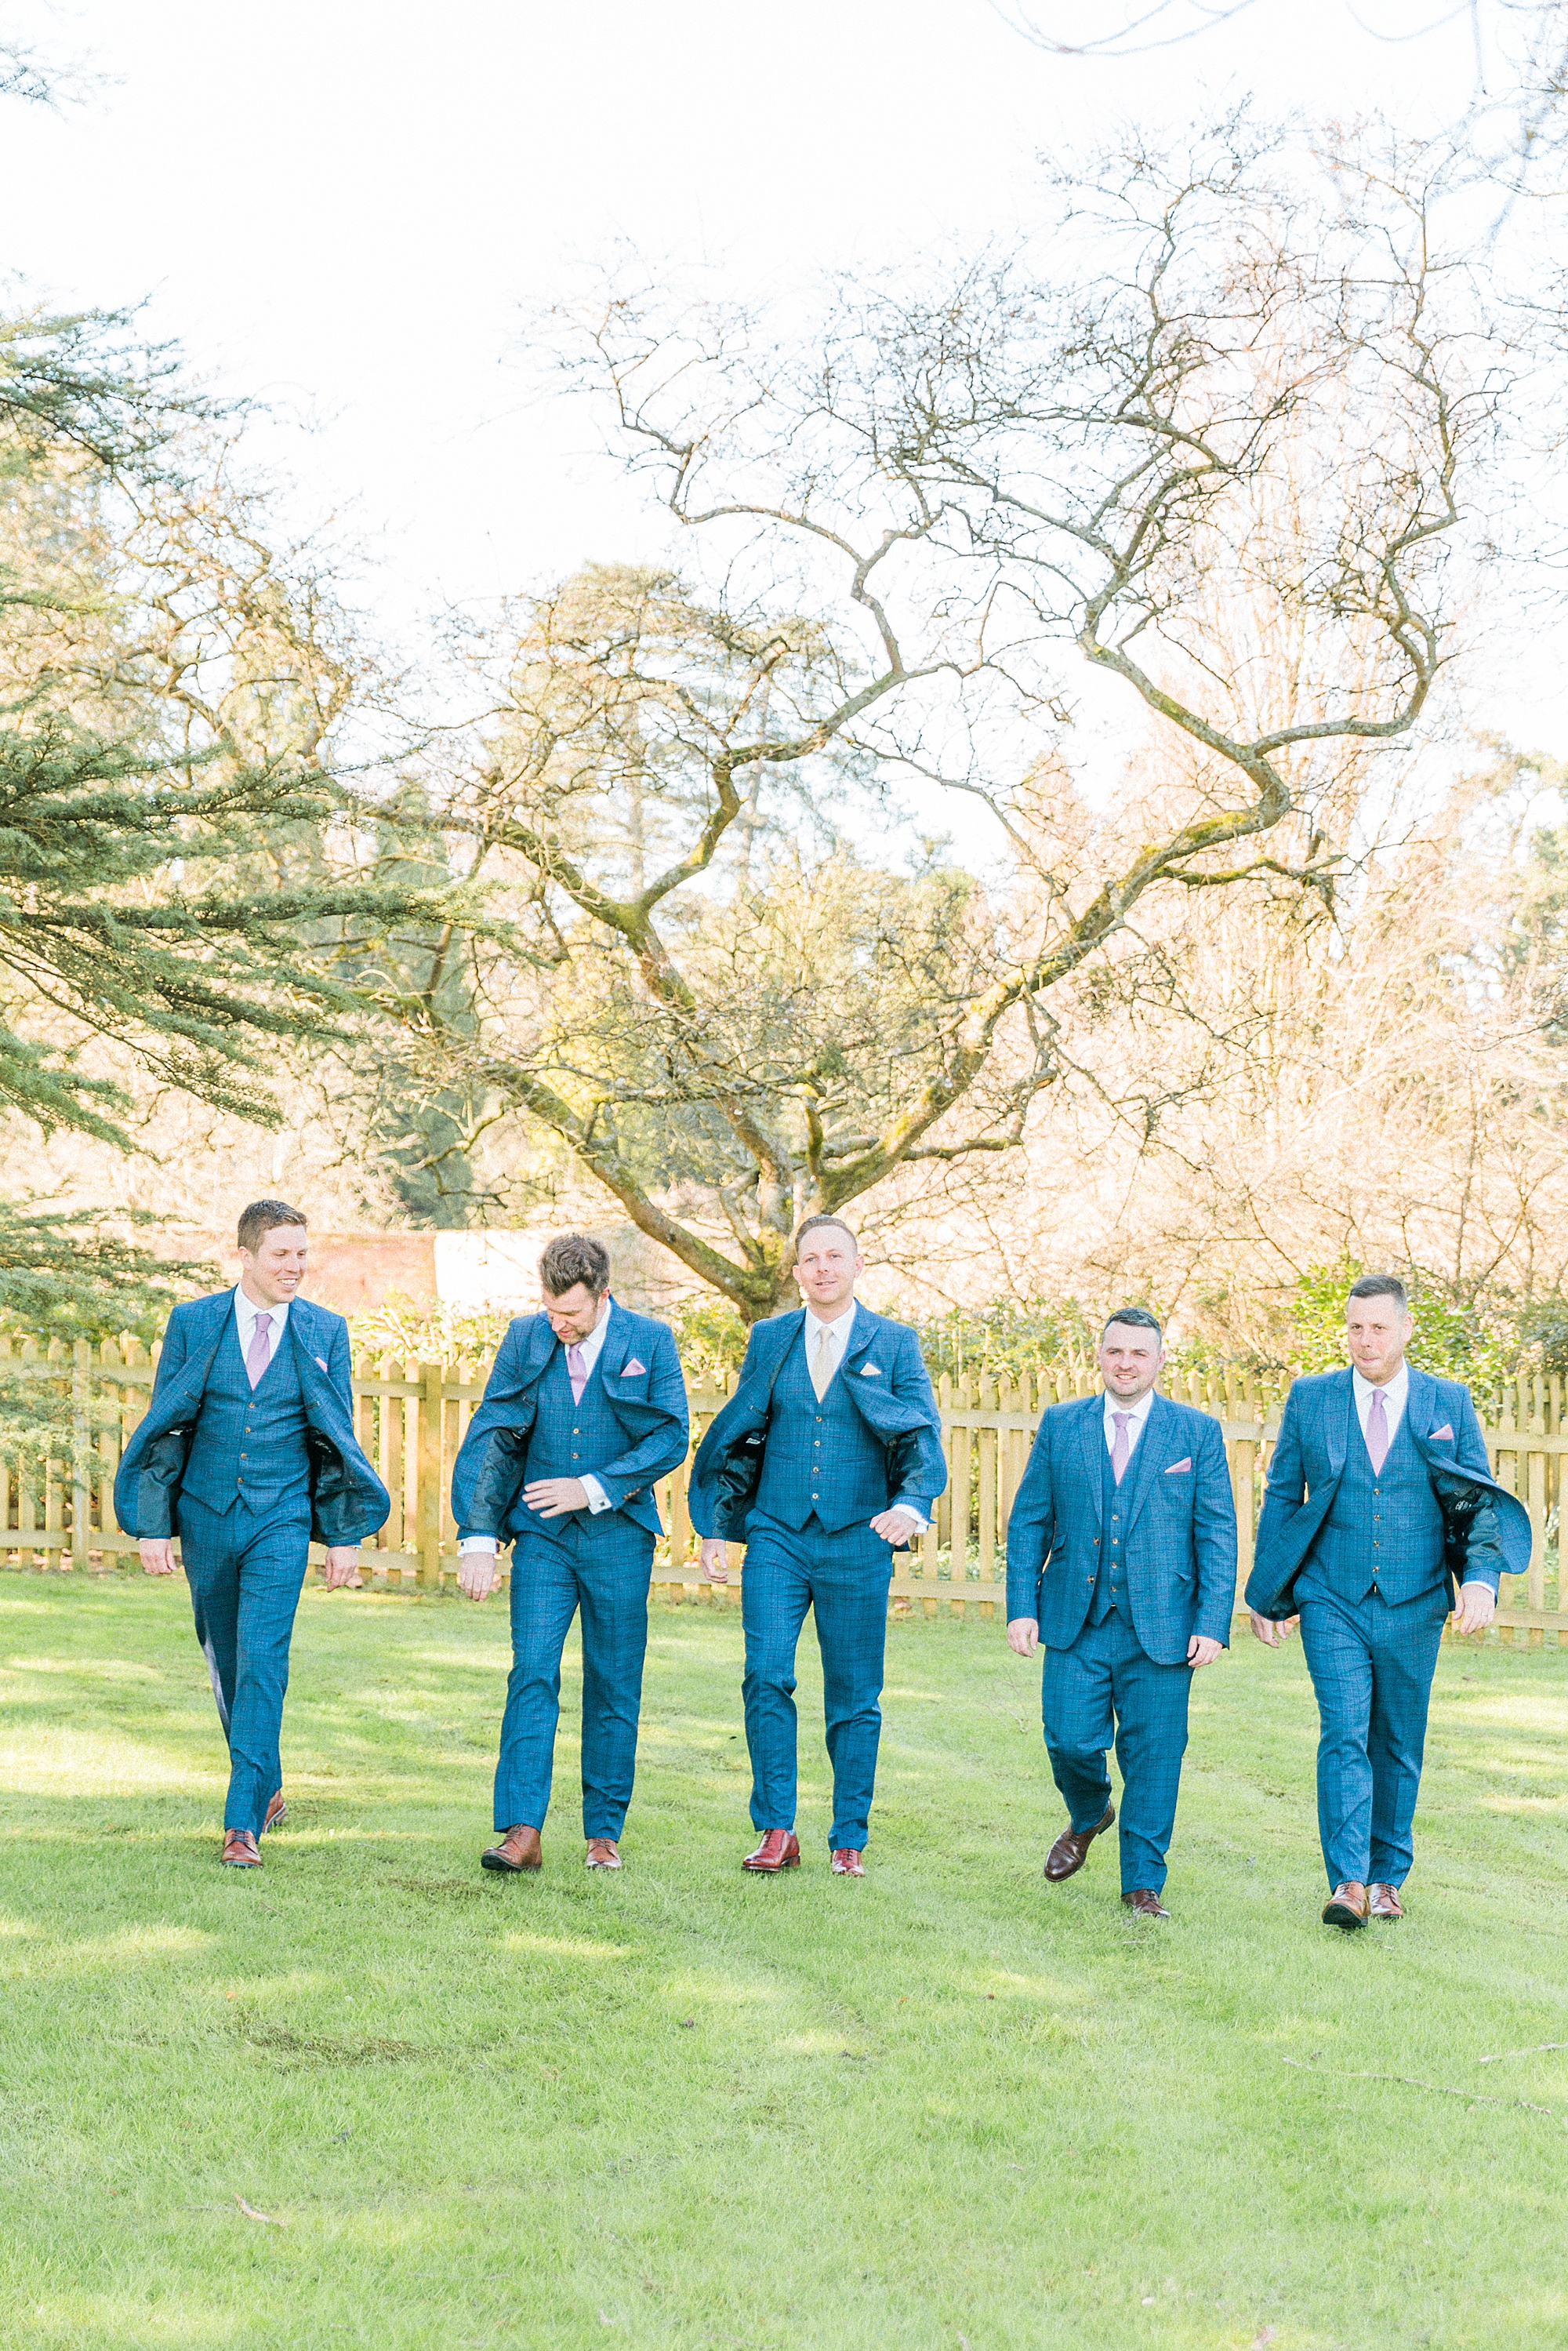 Photograph of a groom and his groomsmen dressed in suits/wedding attire walking together across a lawned area with trees talking with each other as they walk